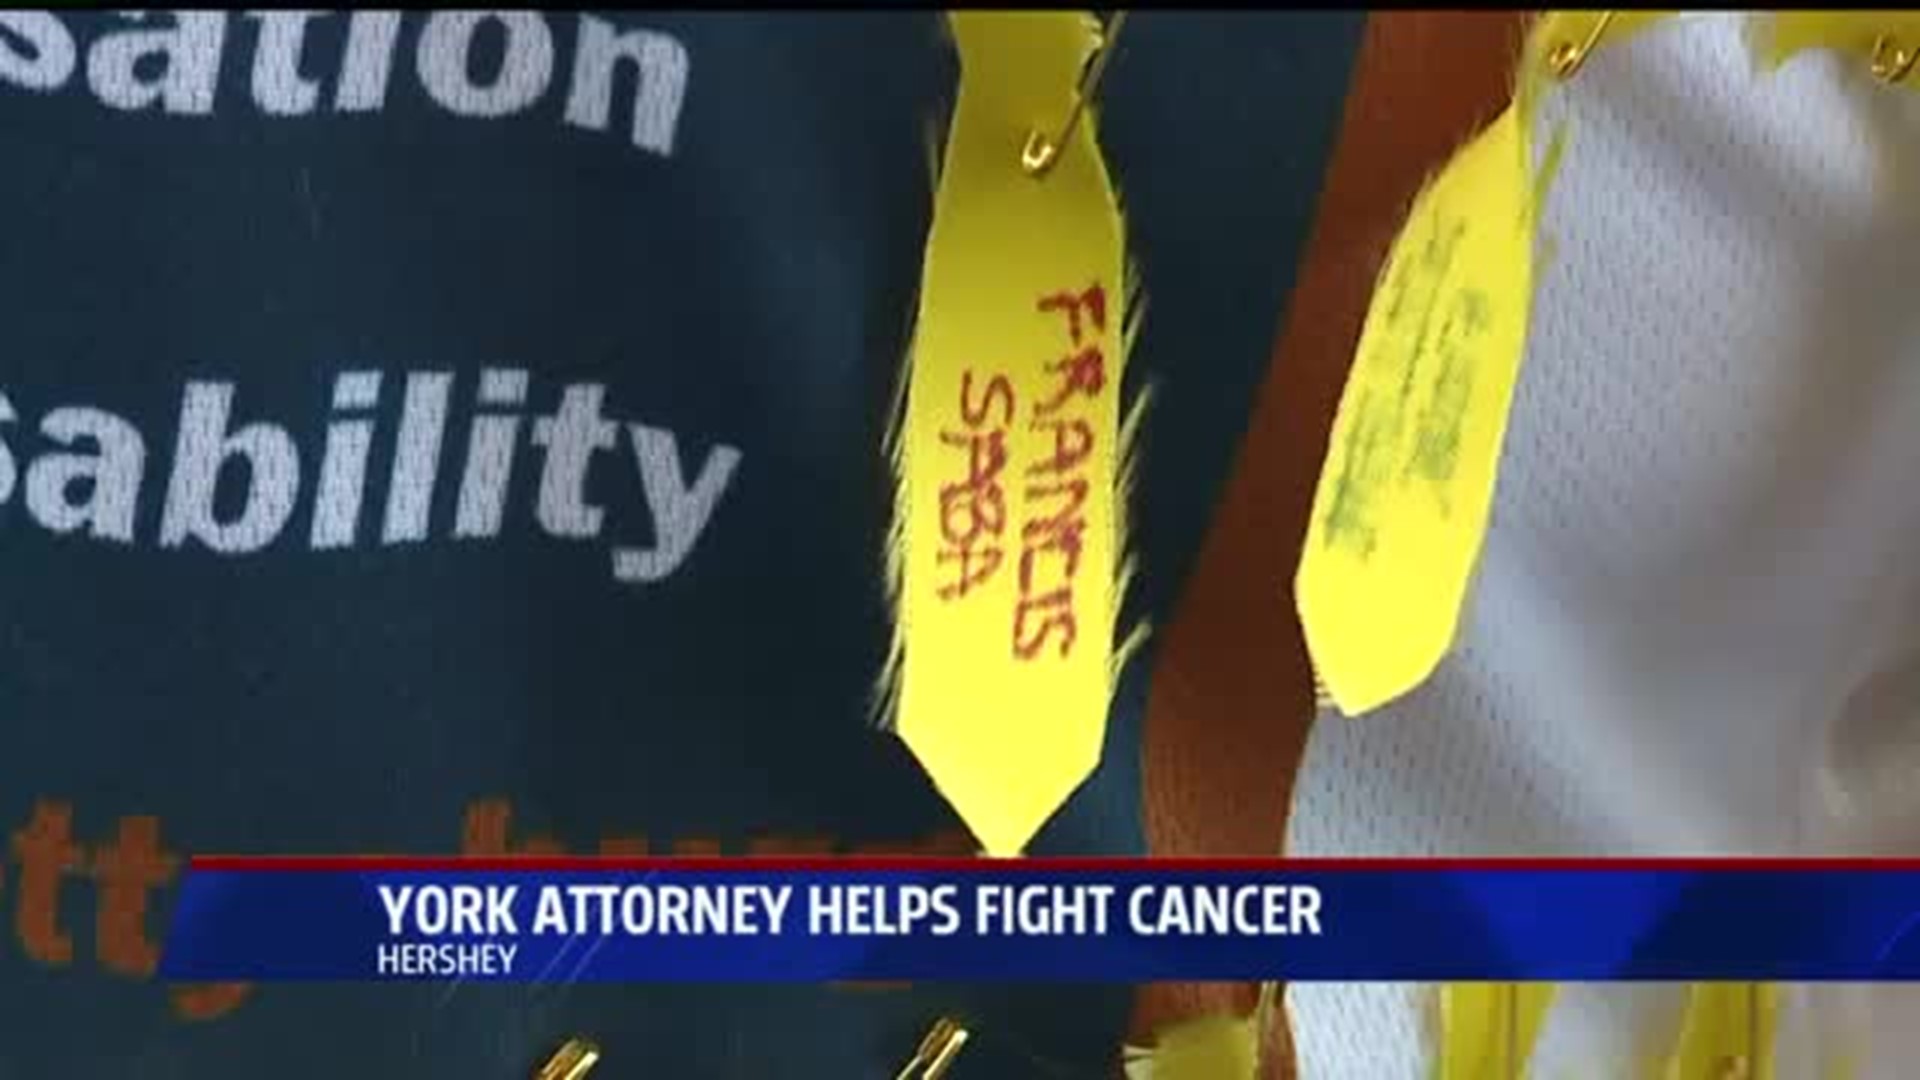 York attorney bikes 170 miles to help people fighting cancer